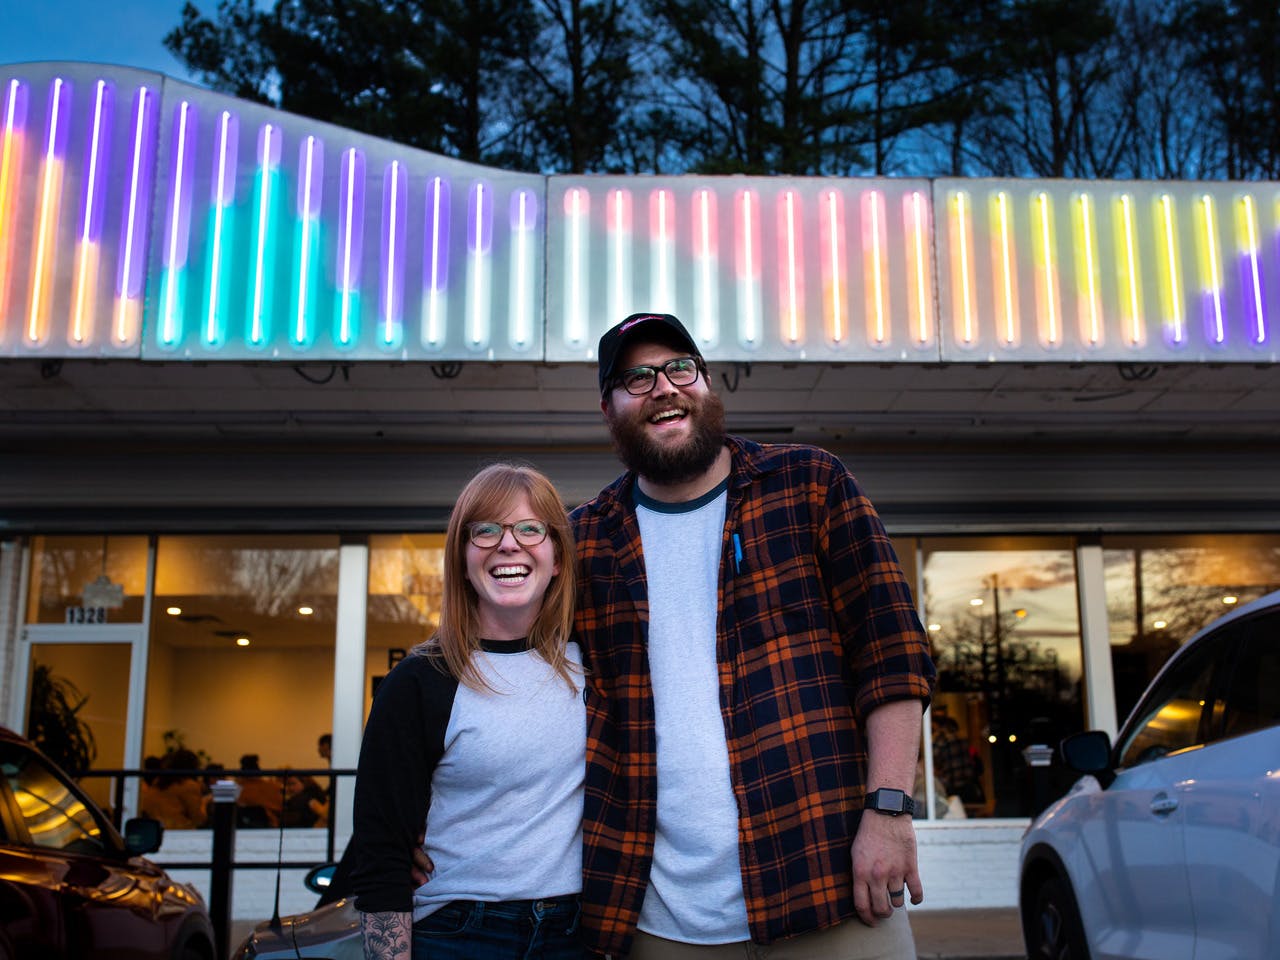 A woman and a man stand together, smiling, in front of a building with bright neon lights atop it.